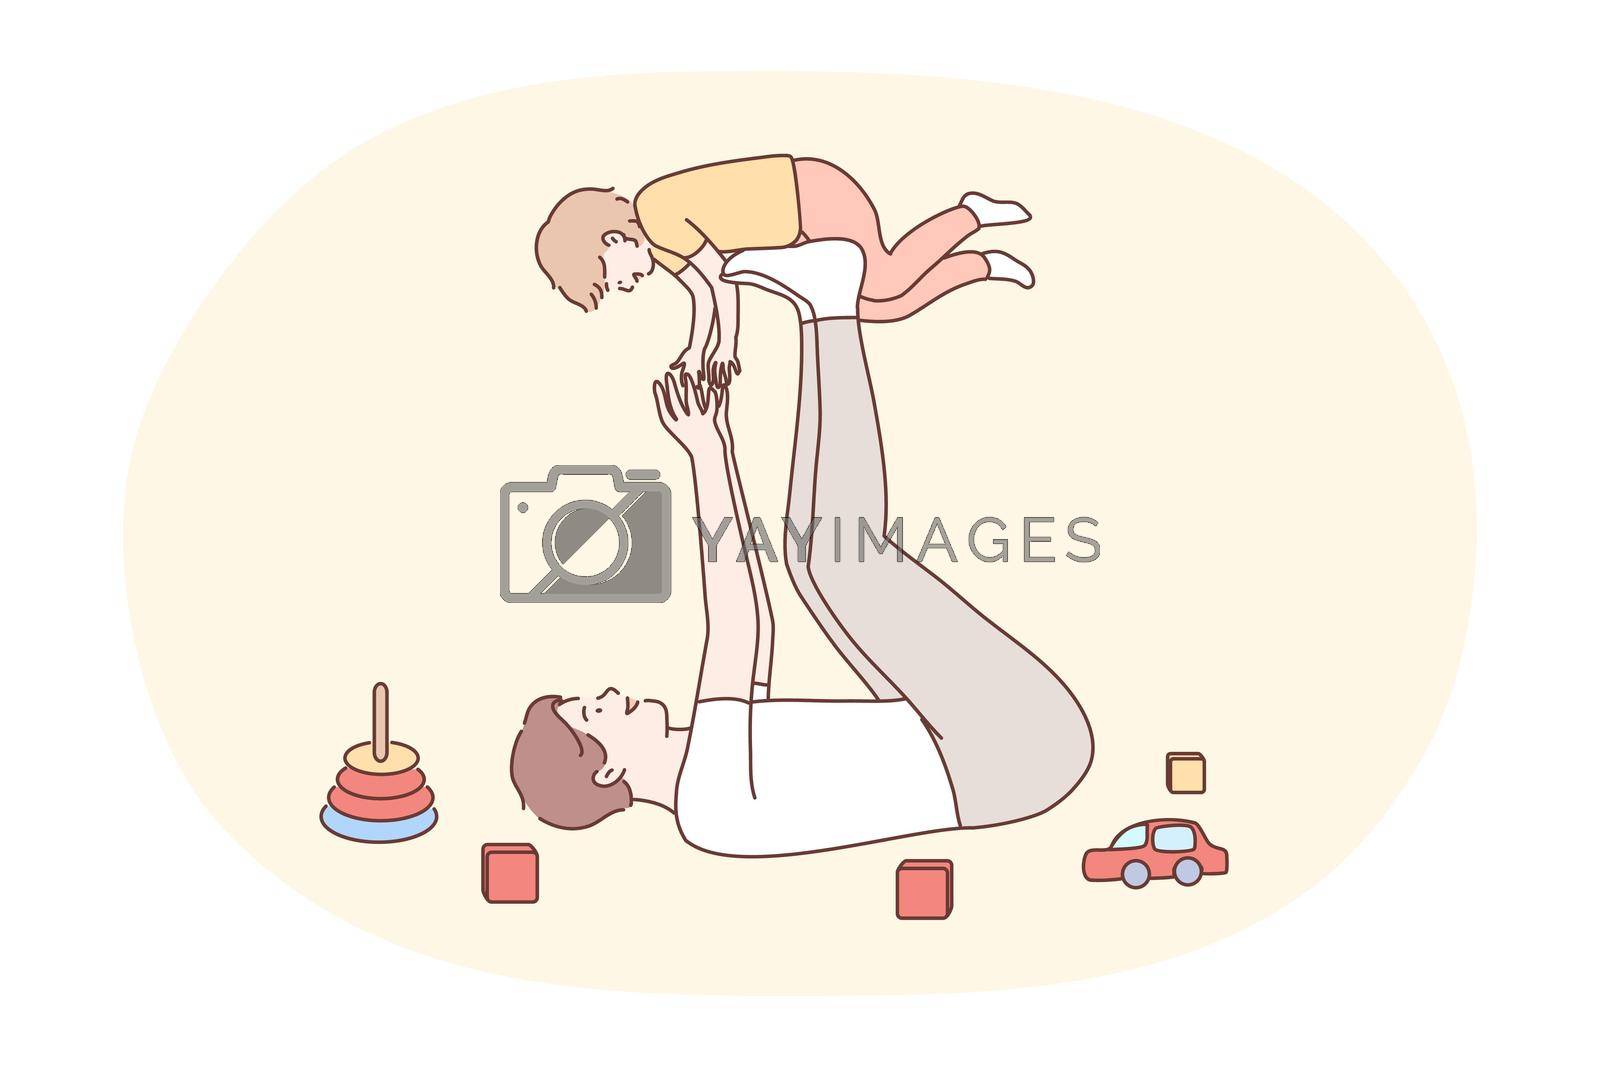 Family, fatherhood, childhood, play, recreation concept. Joyful young man dad daddy cartoon character lying on floor lifting excited happy child kid son. Holiday and fathers day vector illustration.